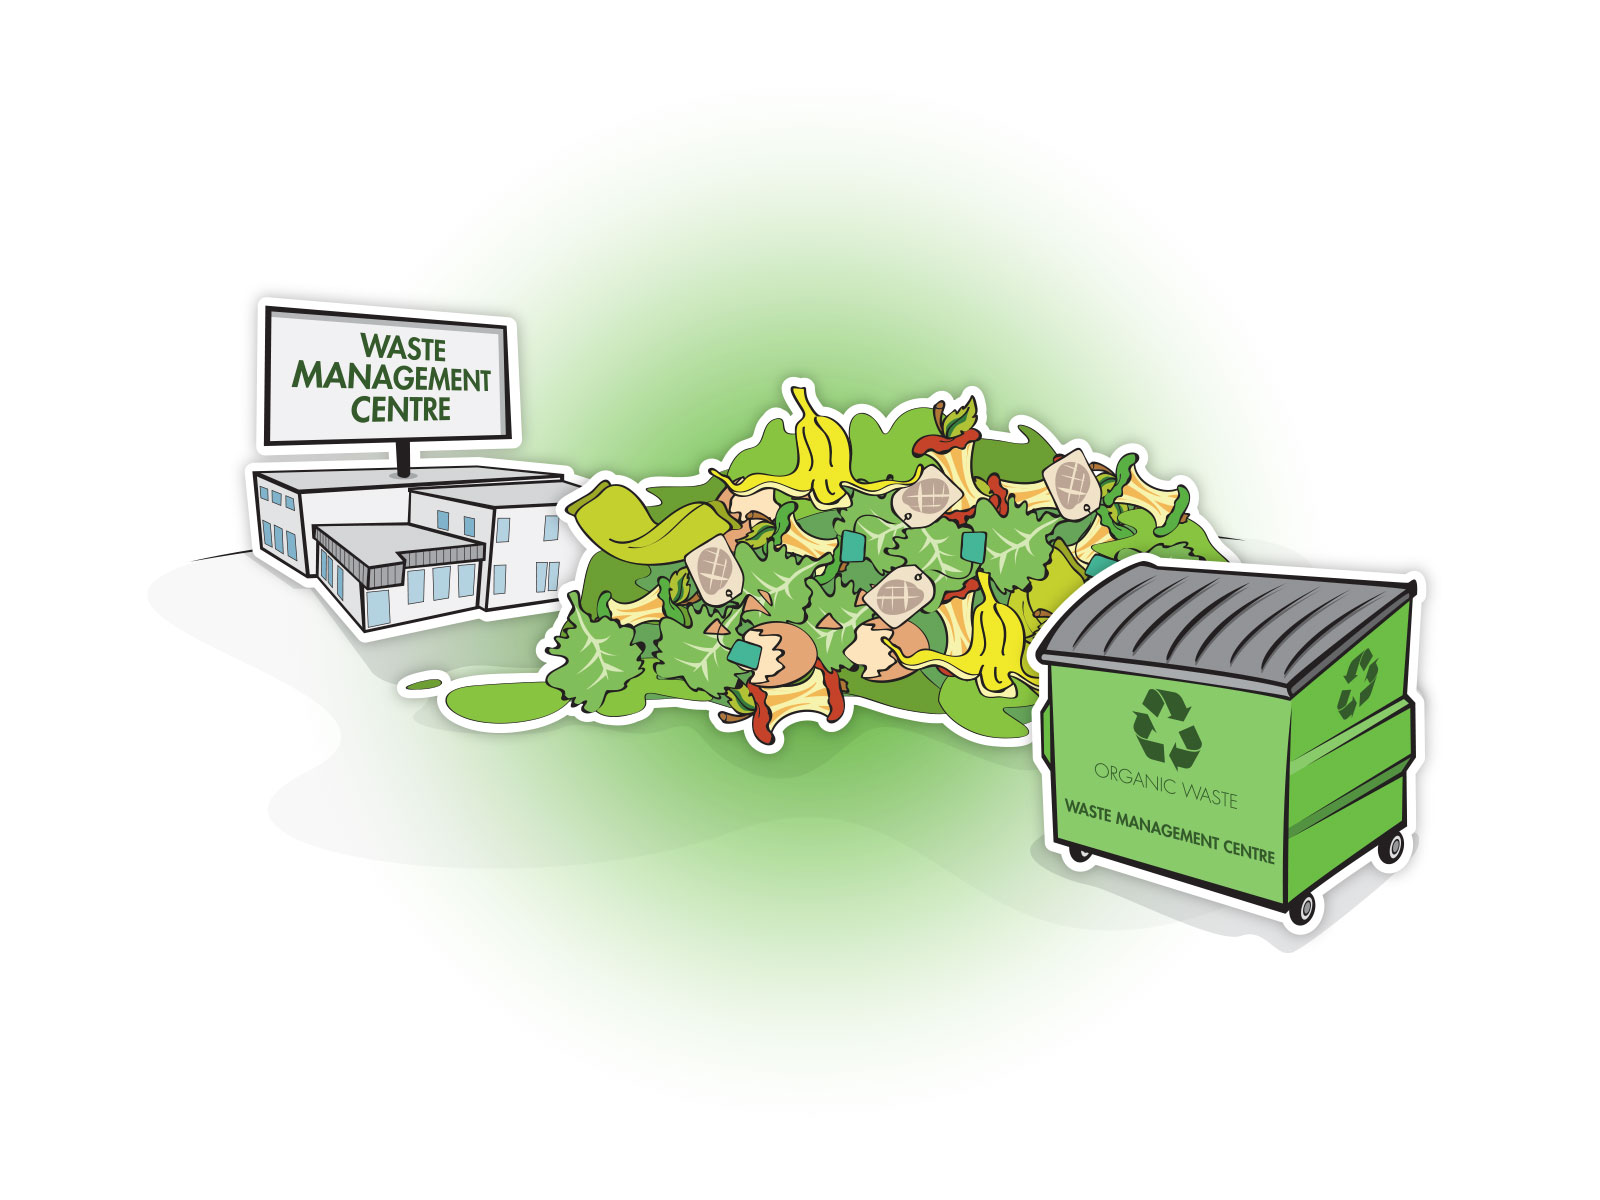 Stylised vector illustration of waste management centre with large skip